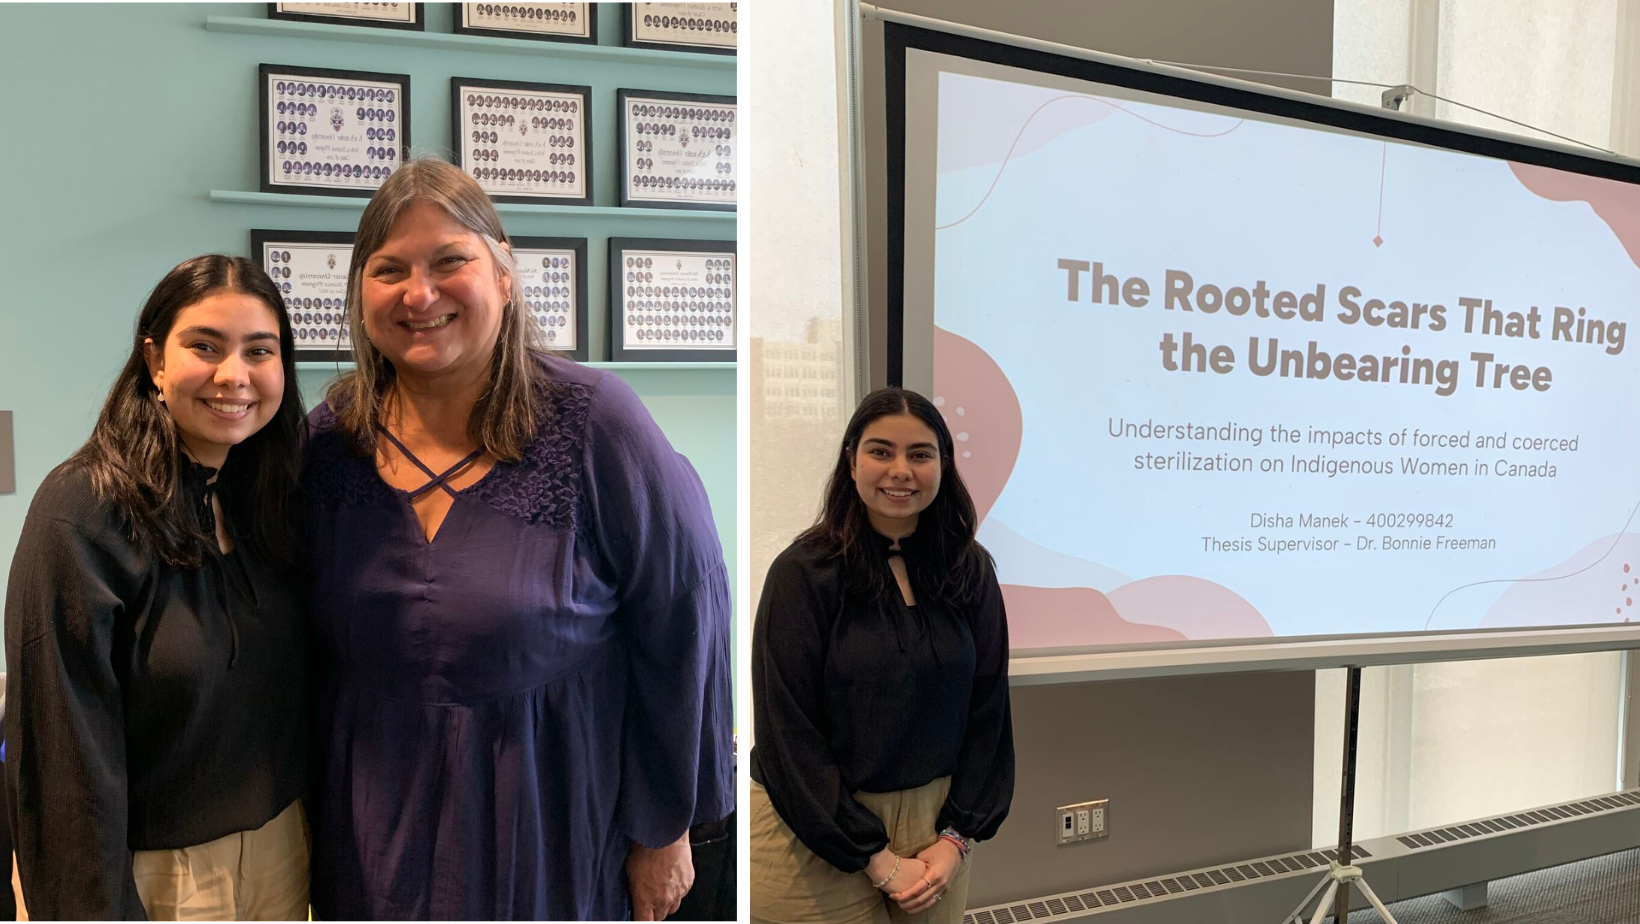 Picture of Disha Manek and Dr. Bonnie Freeman (left); picture of Disha Manek at her thesis presentation (right).